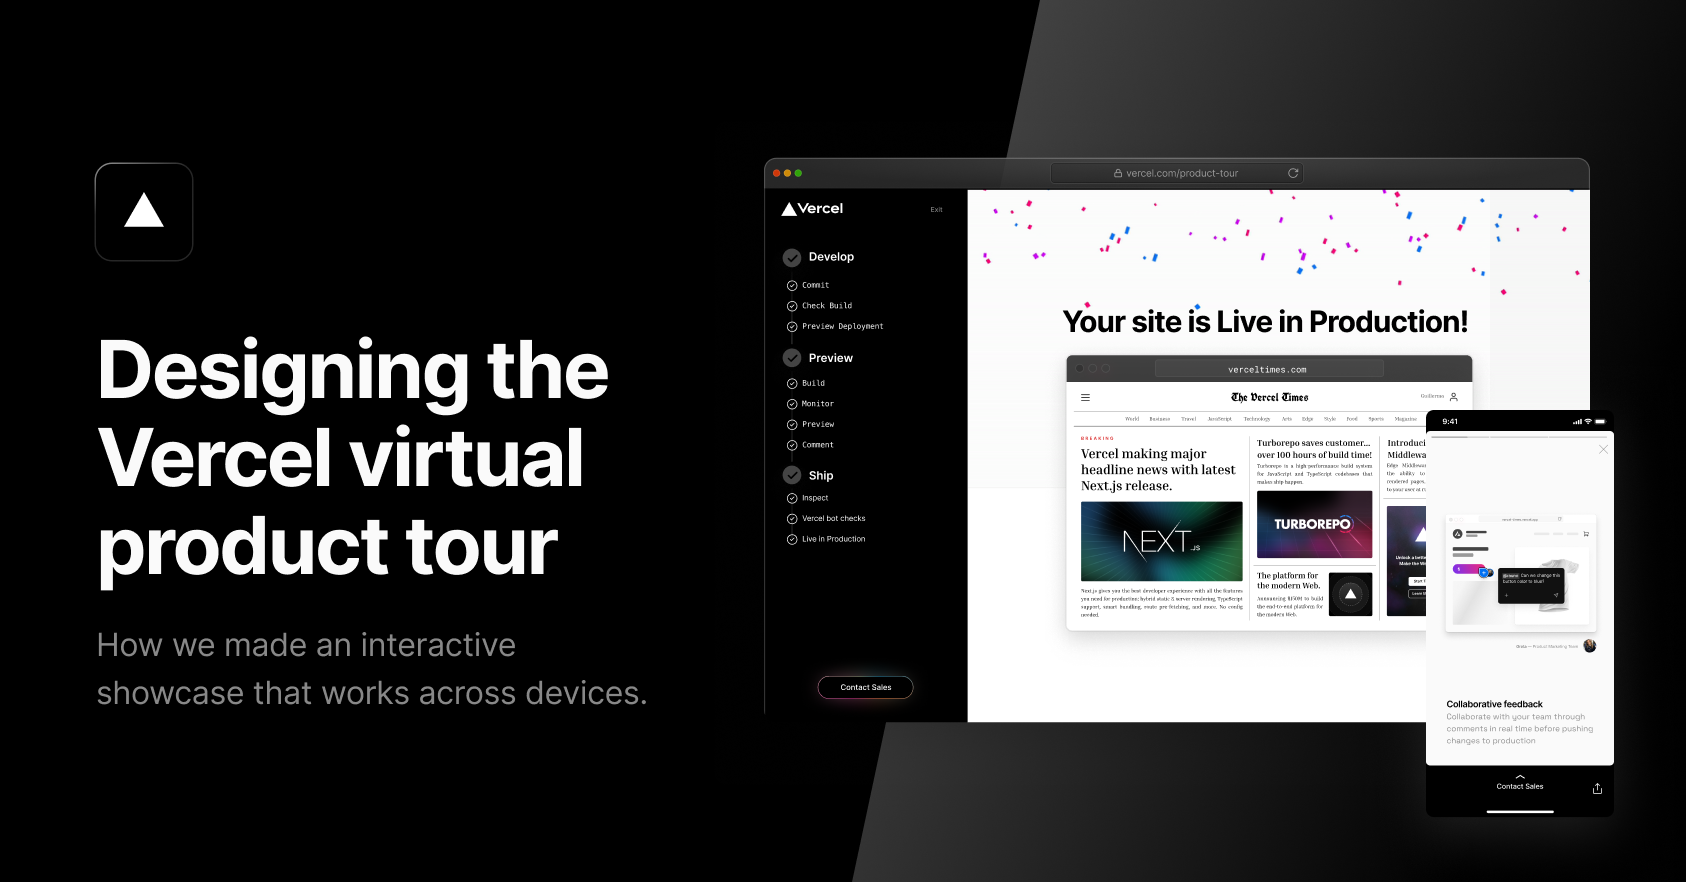 How to build an engaging virtual product tour...